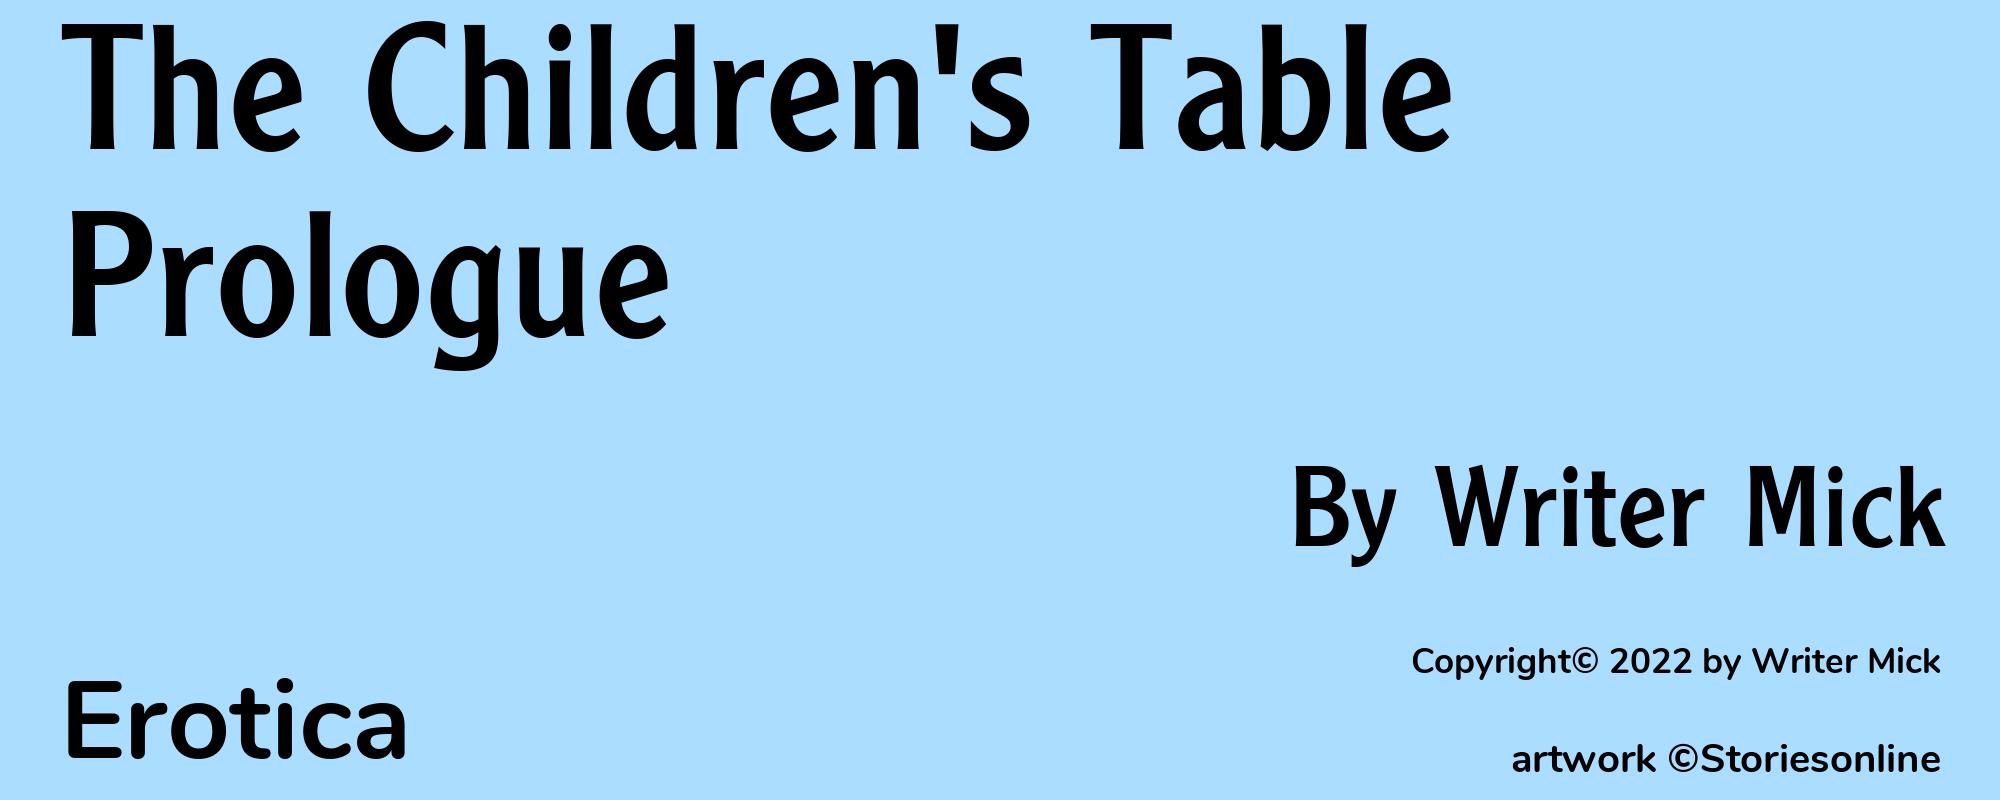 The Children's Table Prologue - Cover